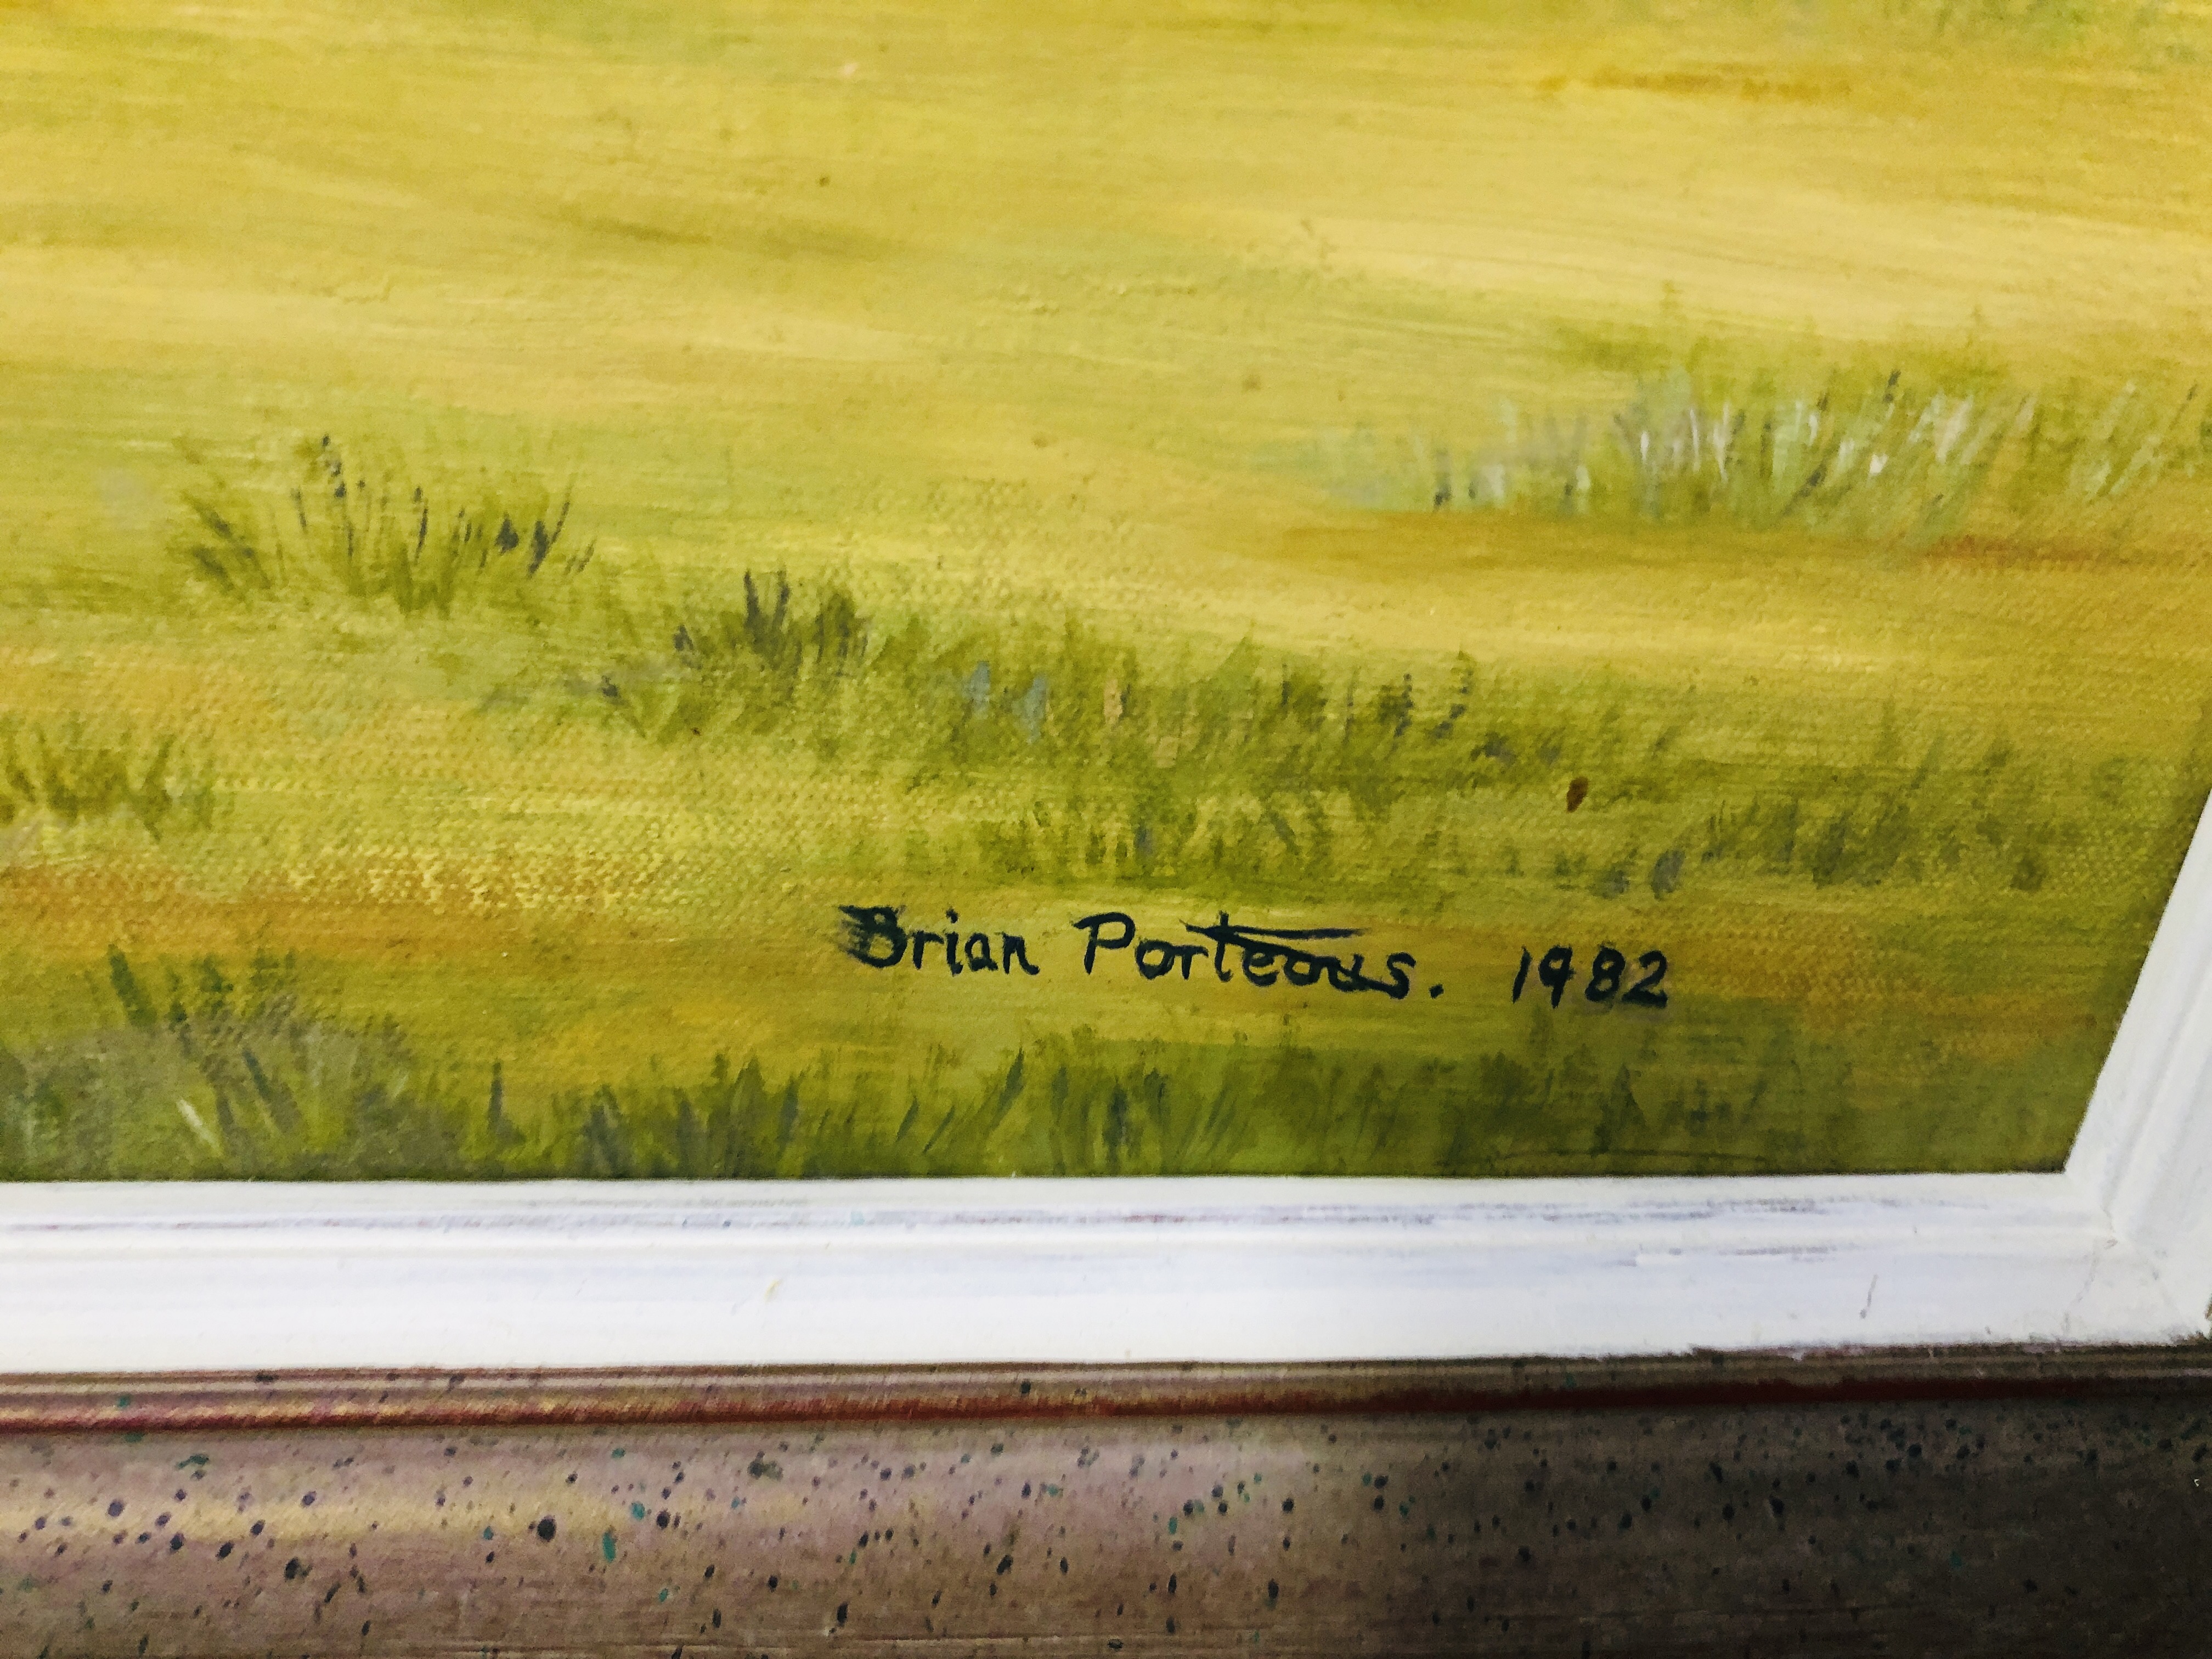 OIL ON CANVAS RACEHORSE "LILAC STAR" BEARING SIGNATURE BRIAN PORTEOUS 1982 38. - Image 7 of 7